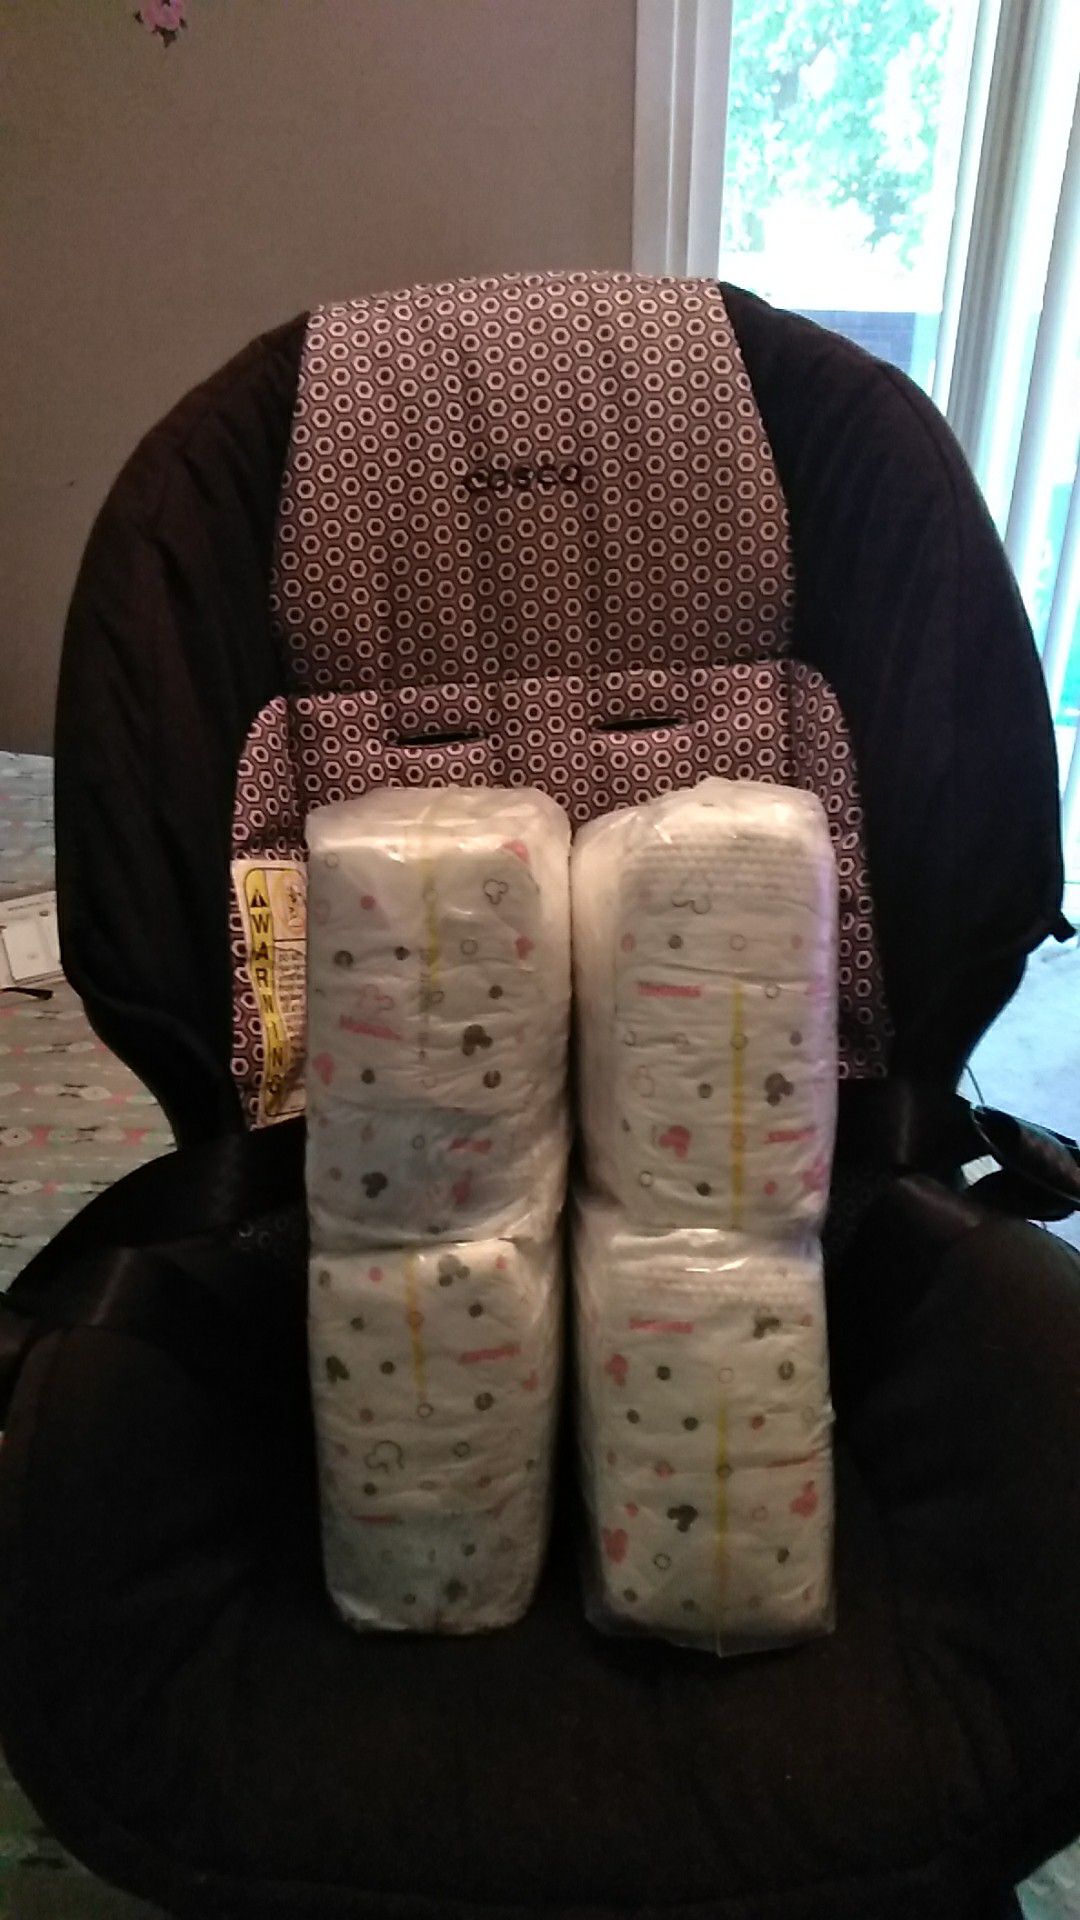 92 Huggies size 1 diapers. Cosco car seat (for 35lb. child)